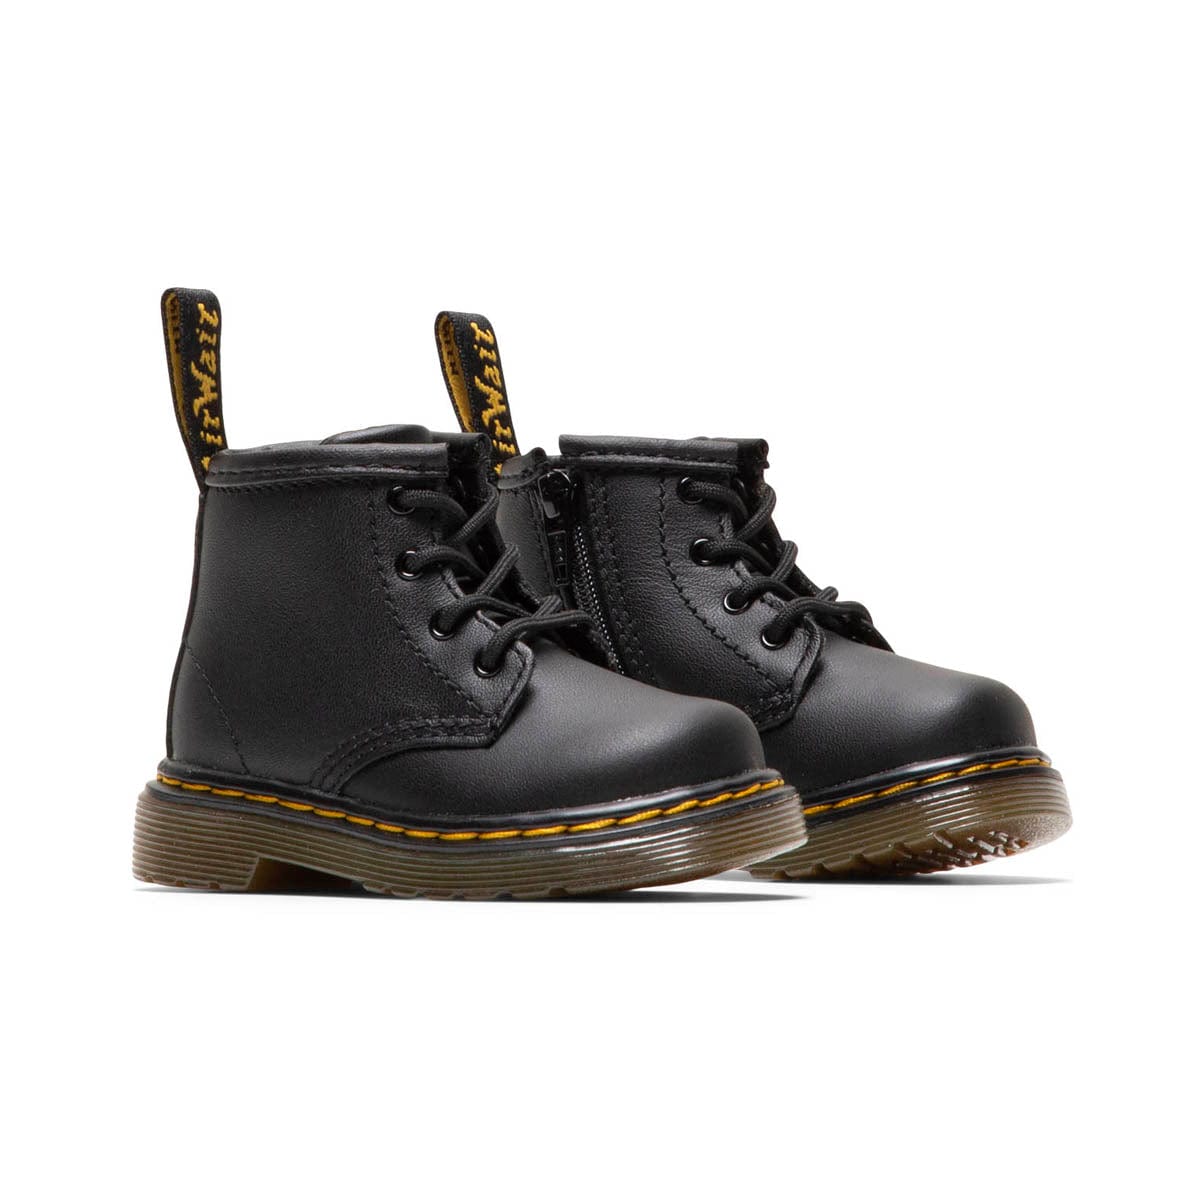 Mentor valuta Smelten StclaircomoShops – StclaircomoShops Store | INFANT 1460 LACE UP BOOTS BLACK  SOFTY | shop the new audrick collection now at dr martens